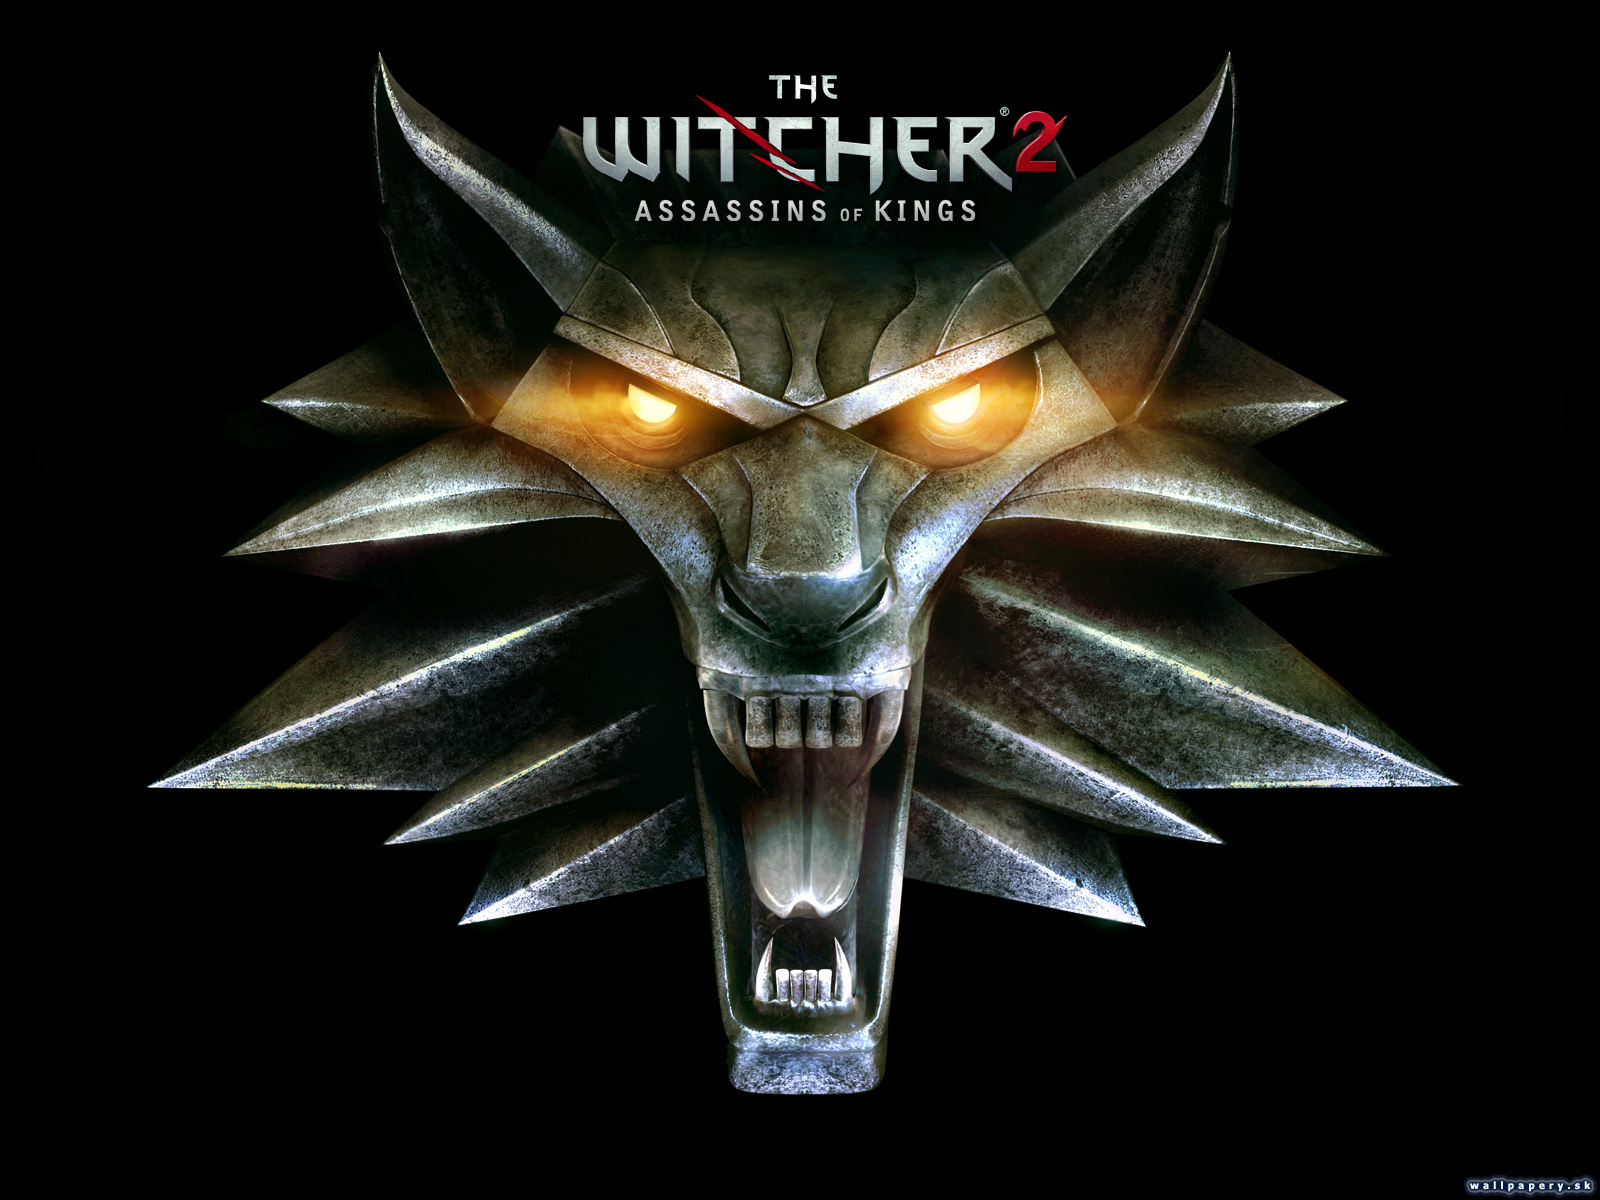 The Witcher 2: Assassins of Kings - wallpaper 3